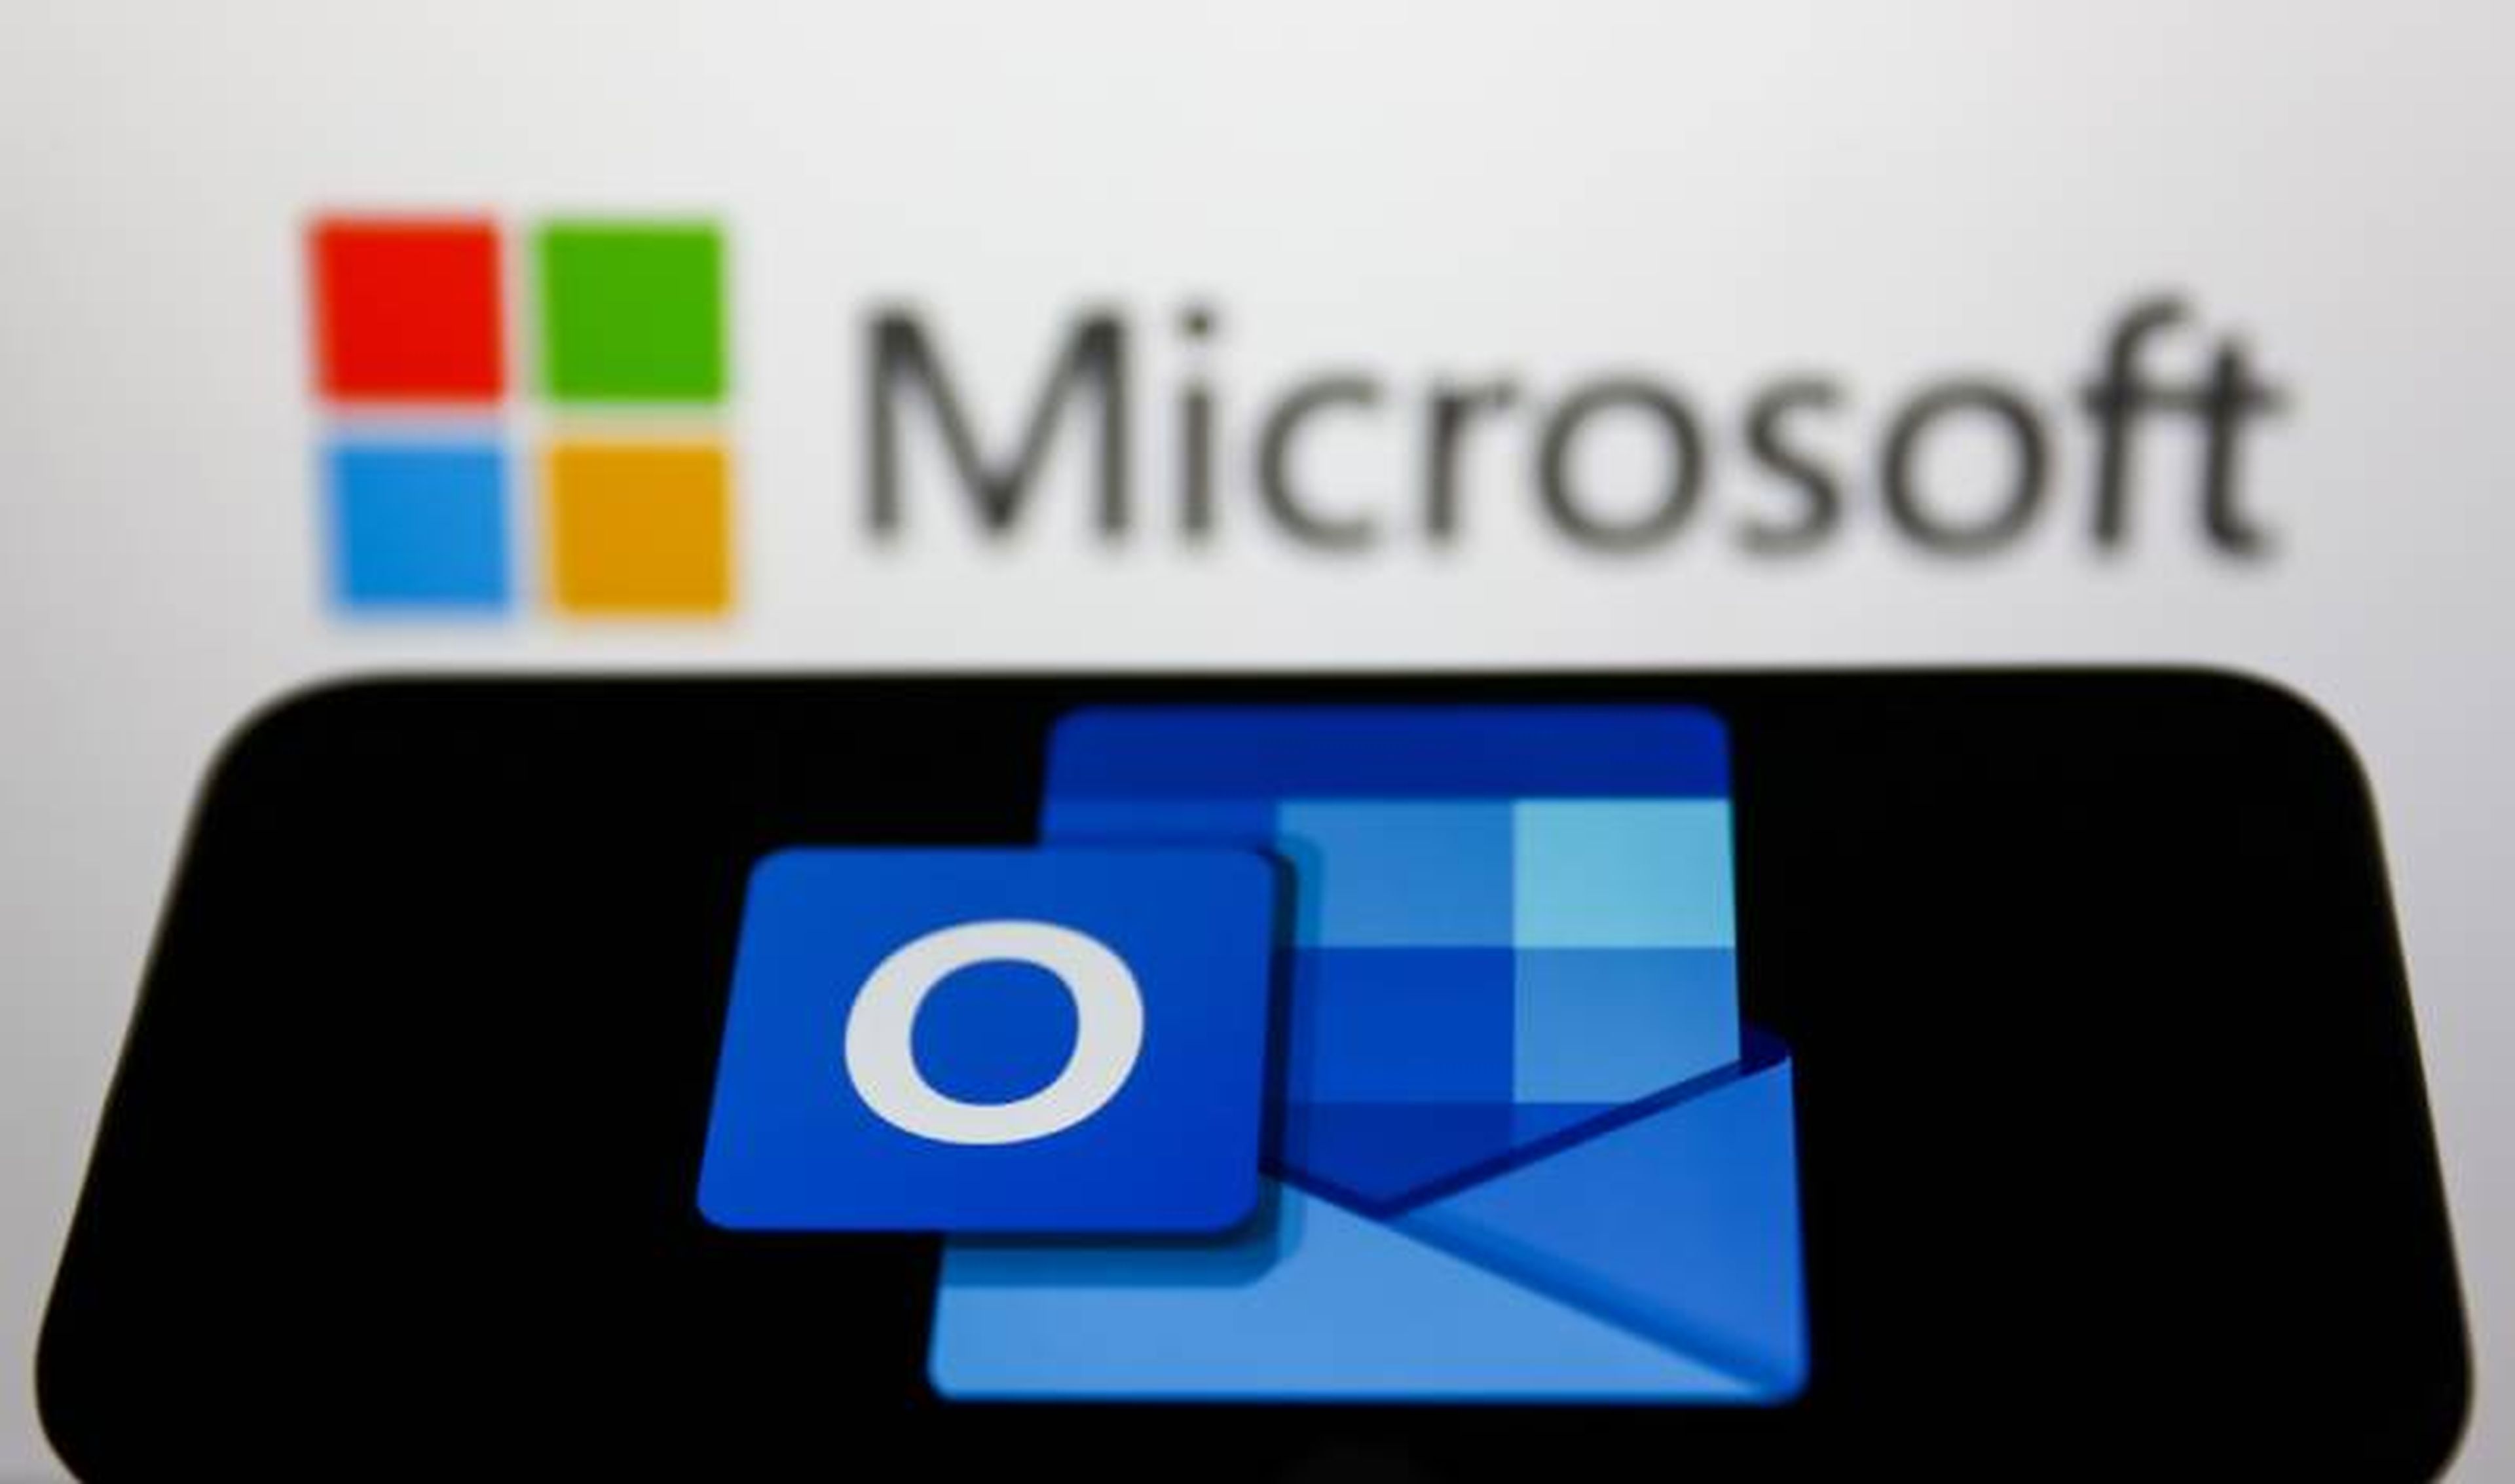 Microsoft Outlook logo displayed on a phone screen and Microsoft logo displayed on a screen in the background are seen in this illustration photo taken in Krakow, Poland on May 26, 2022. (Photo Illustration by Jakub Porzycki/NurPhoto via Getty Images)